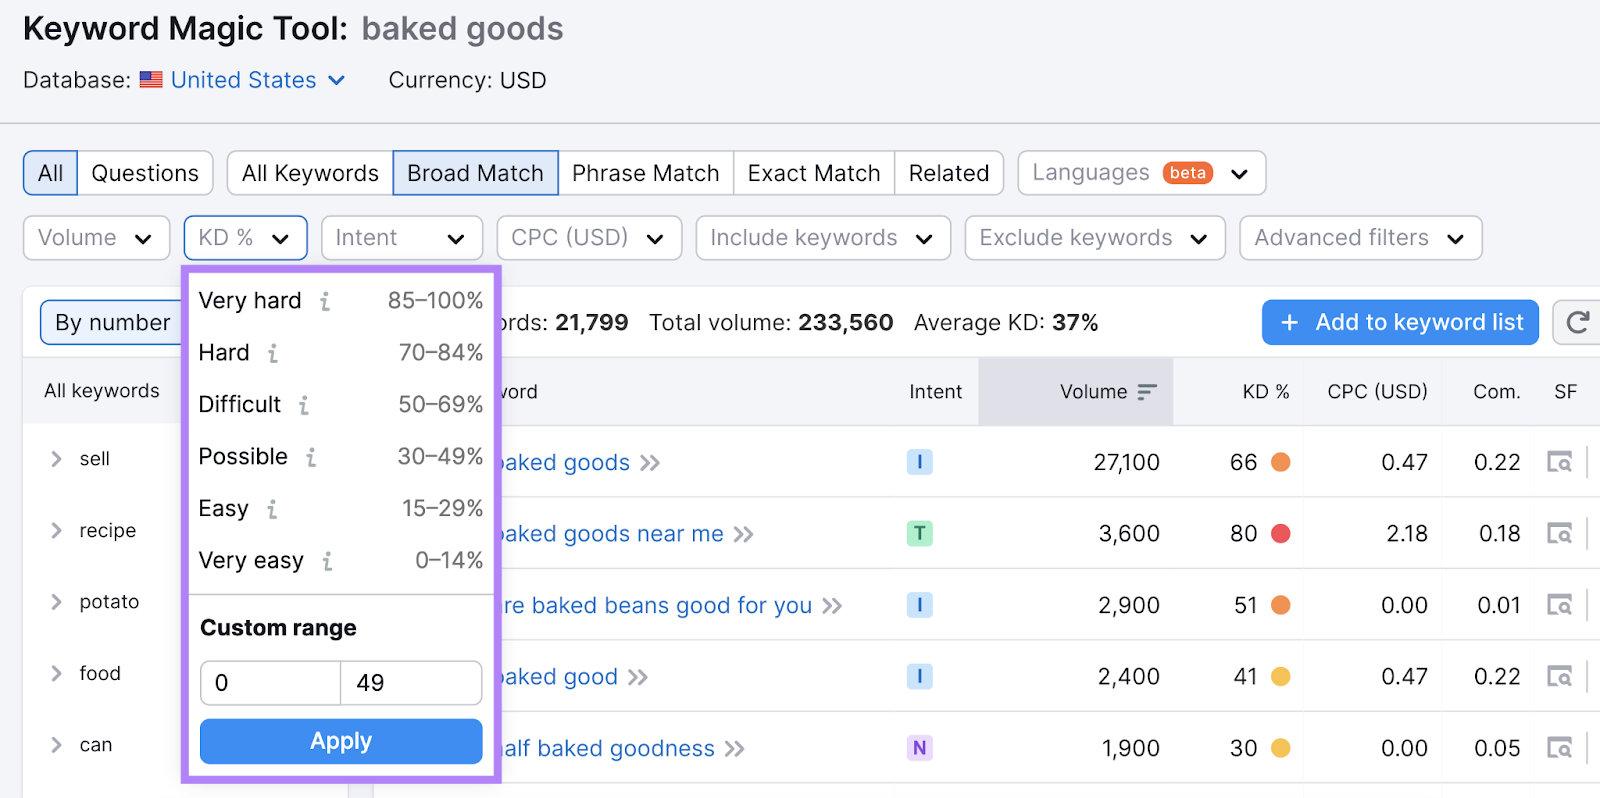 Keyword Magic Tool results for “baked goods” with keyword difficulty filter applied of 0-49%.